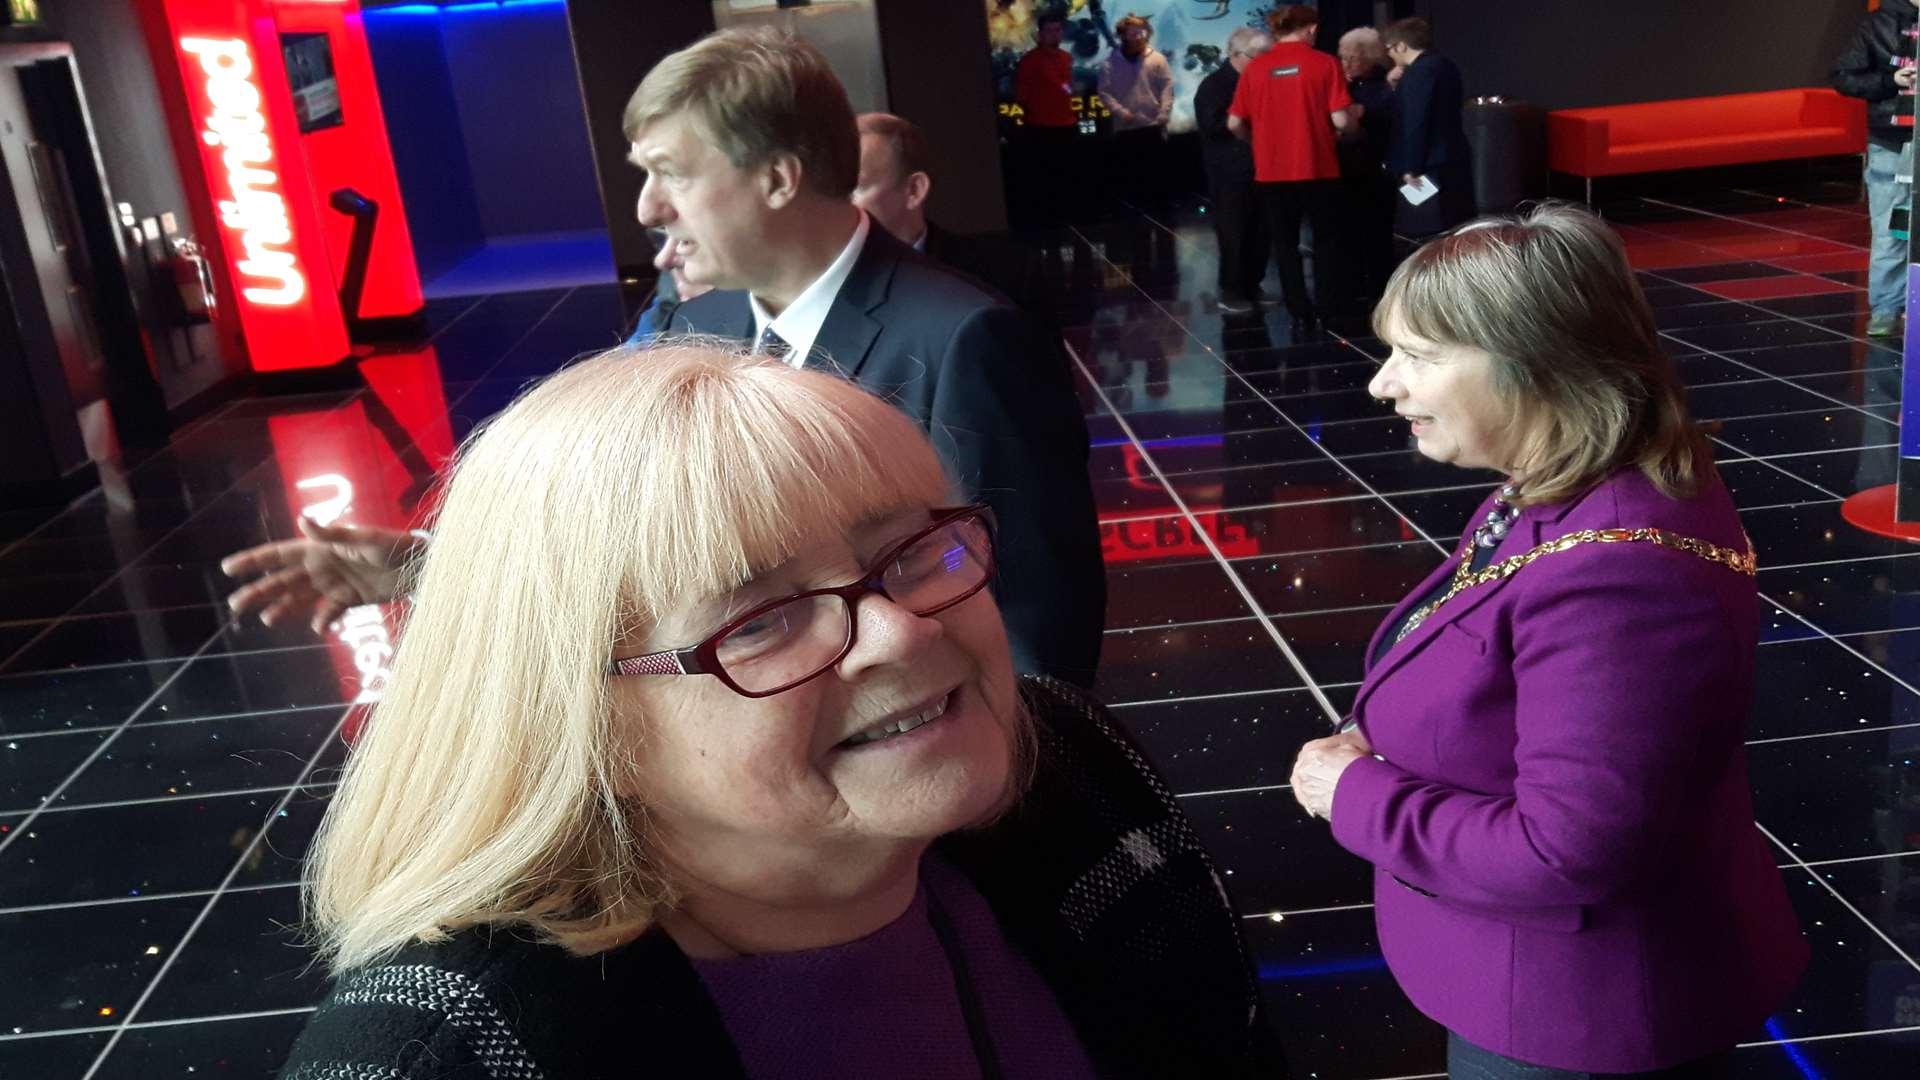 First cinemagoer. Val Ruthvens with council leader Keith Morris and chairman Sue Chandler in the background.